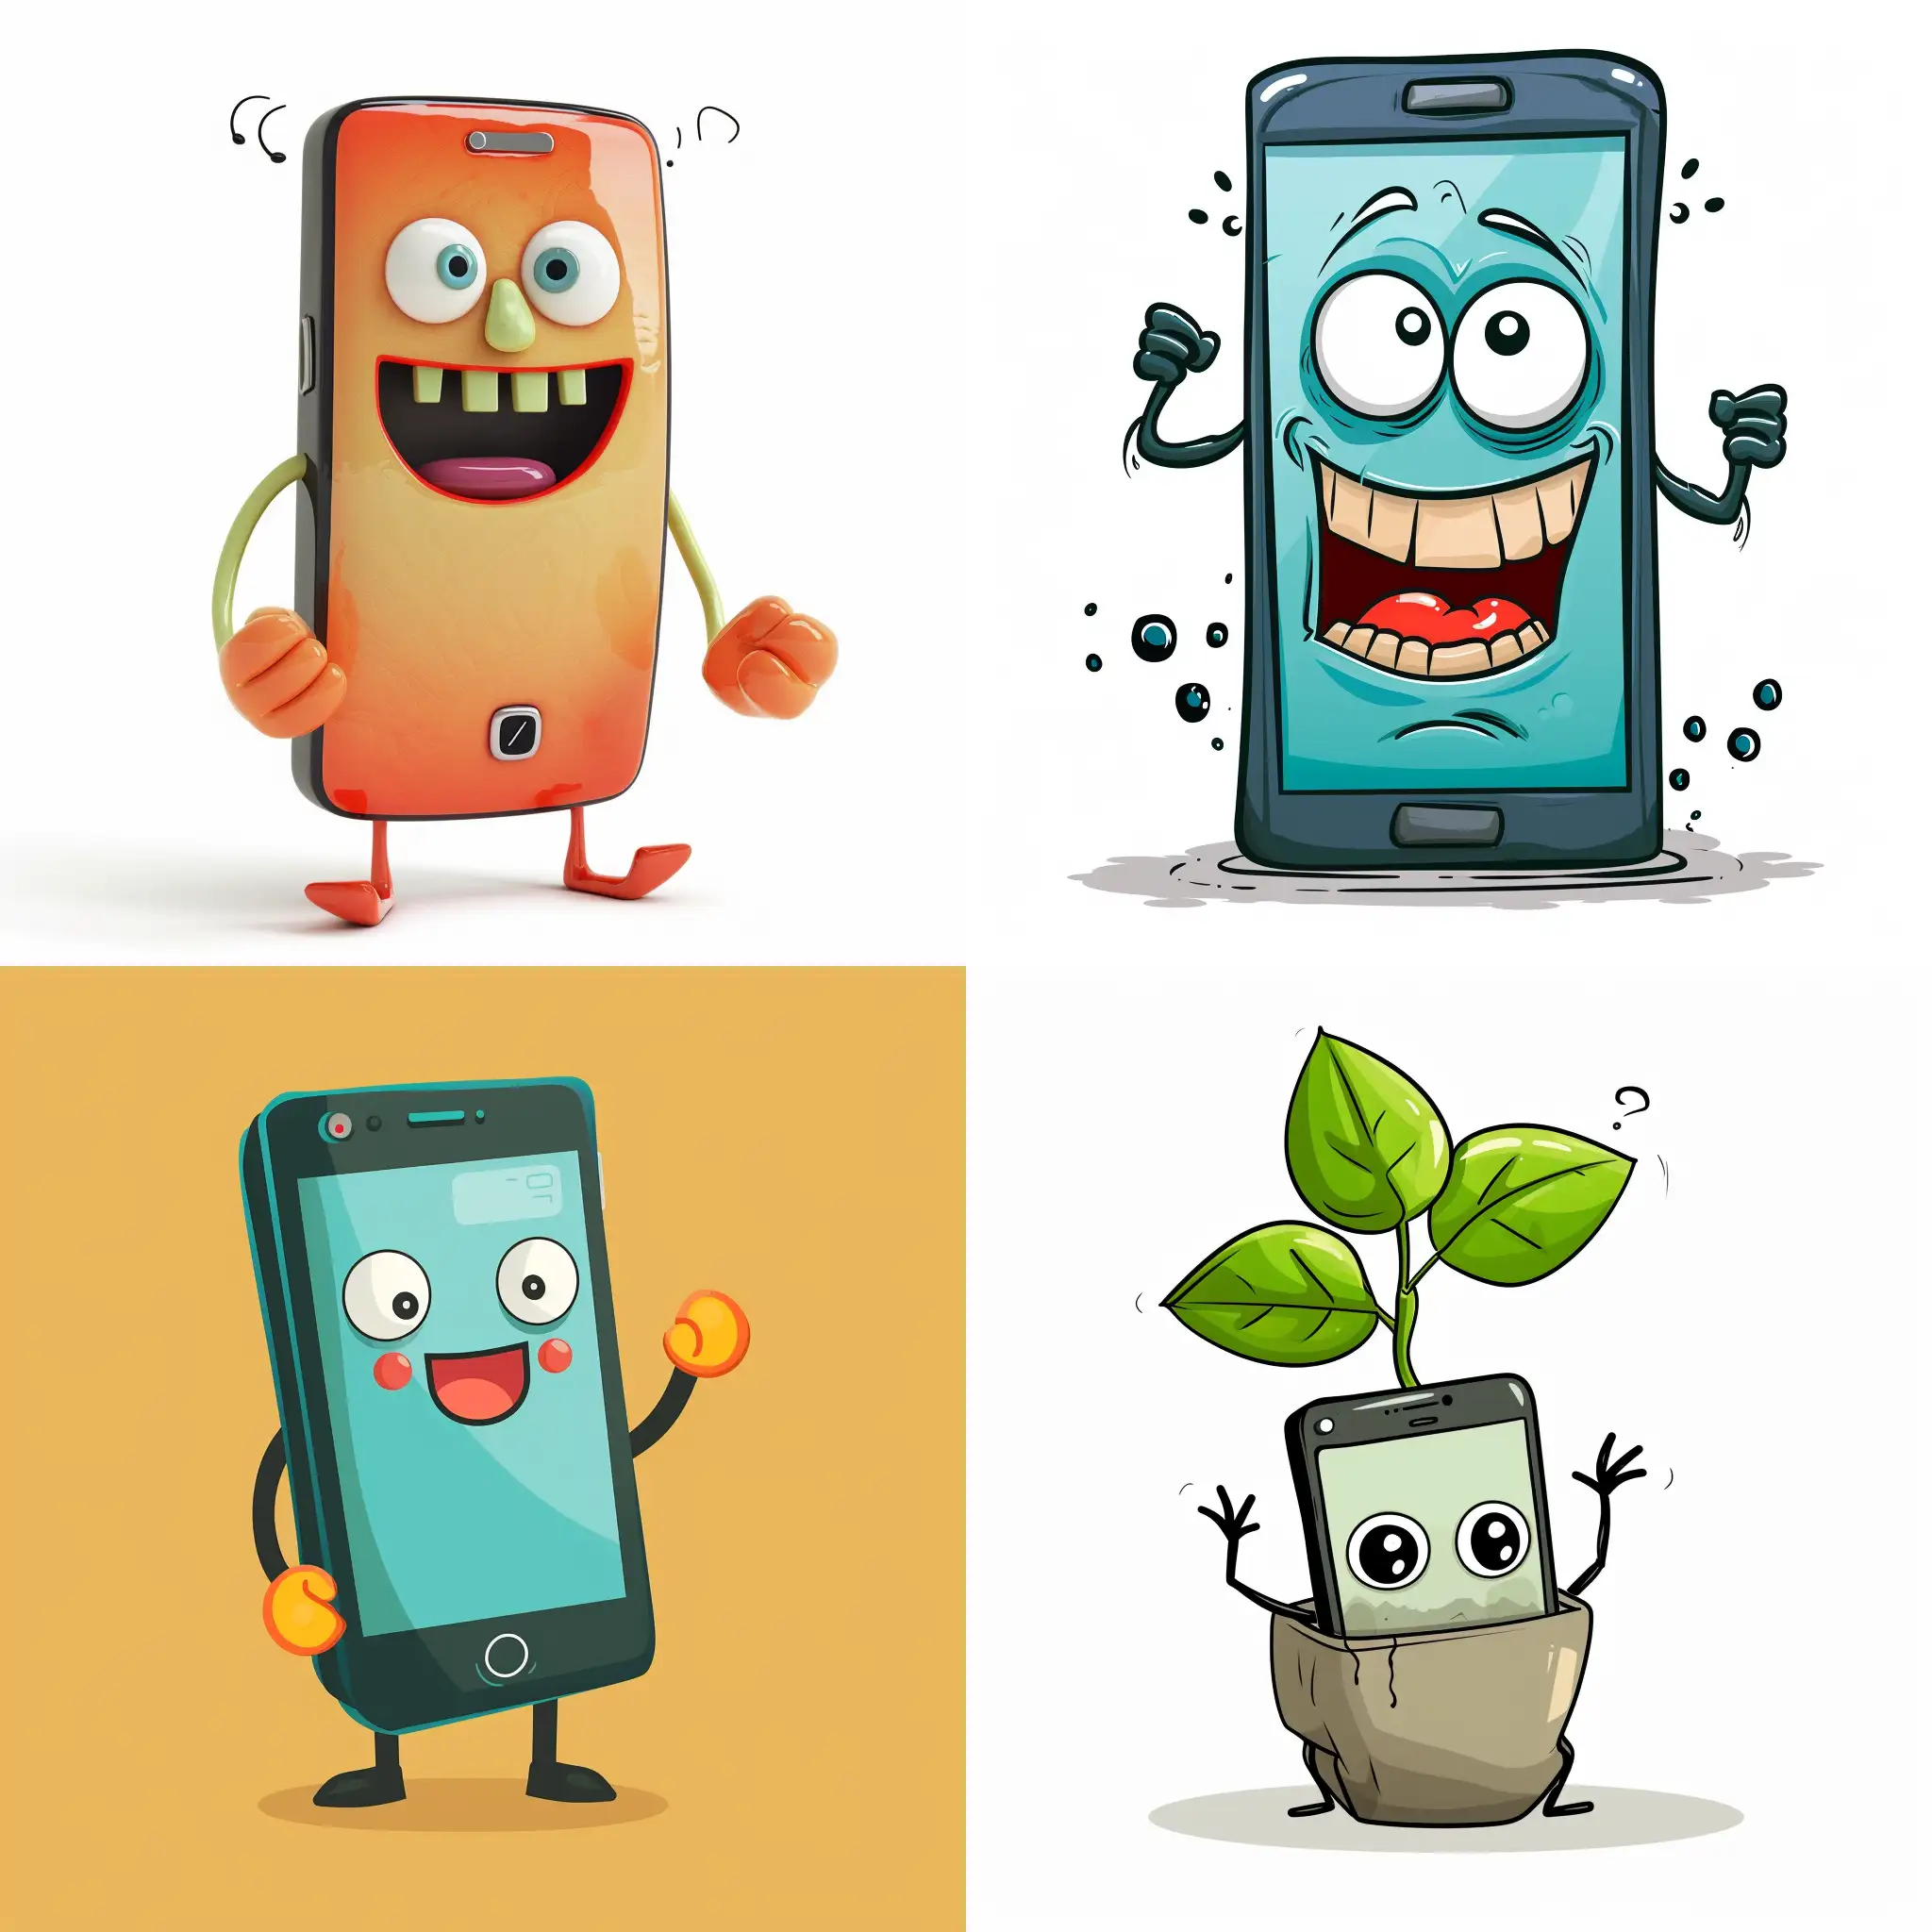 Playful-Cartoon-Smartphone-with-Vibrant-Colors-and-Unique-Personality